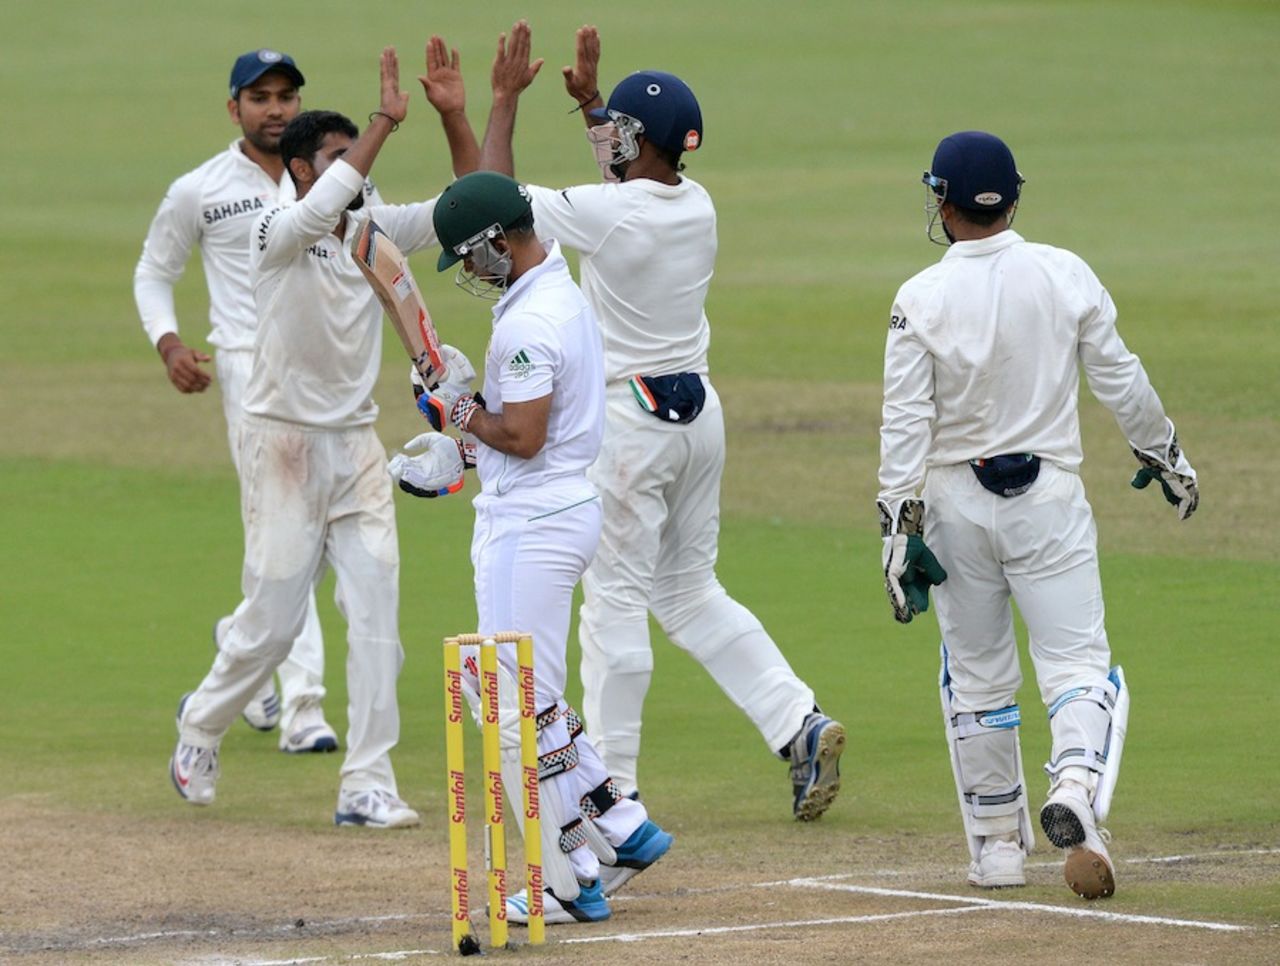 JP Duminy was trapped lbw by Ravindra Jadeja, South Africa v India, 2nd Test, Durban, 3rd day, December 28, 2013